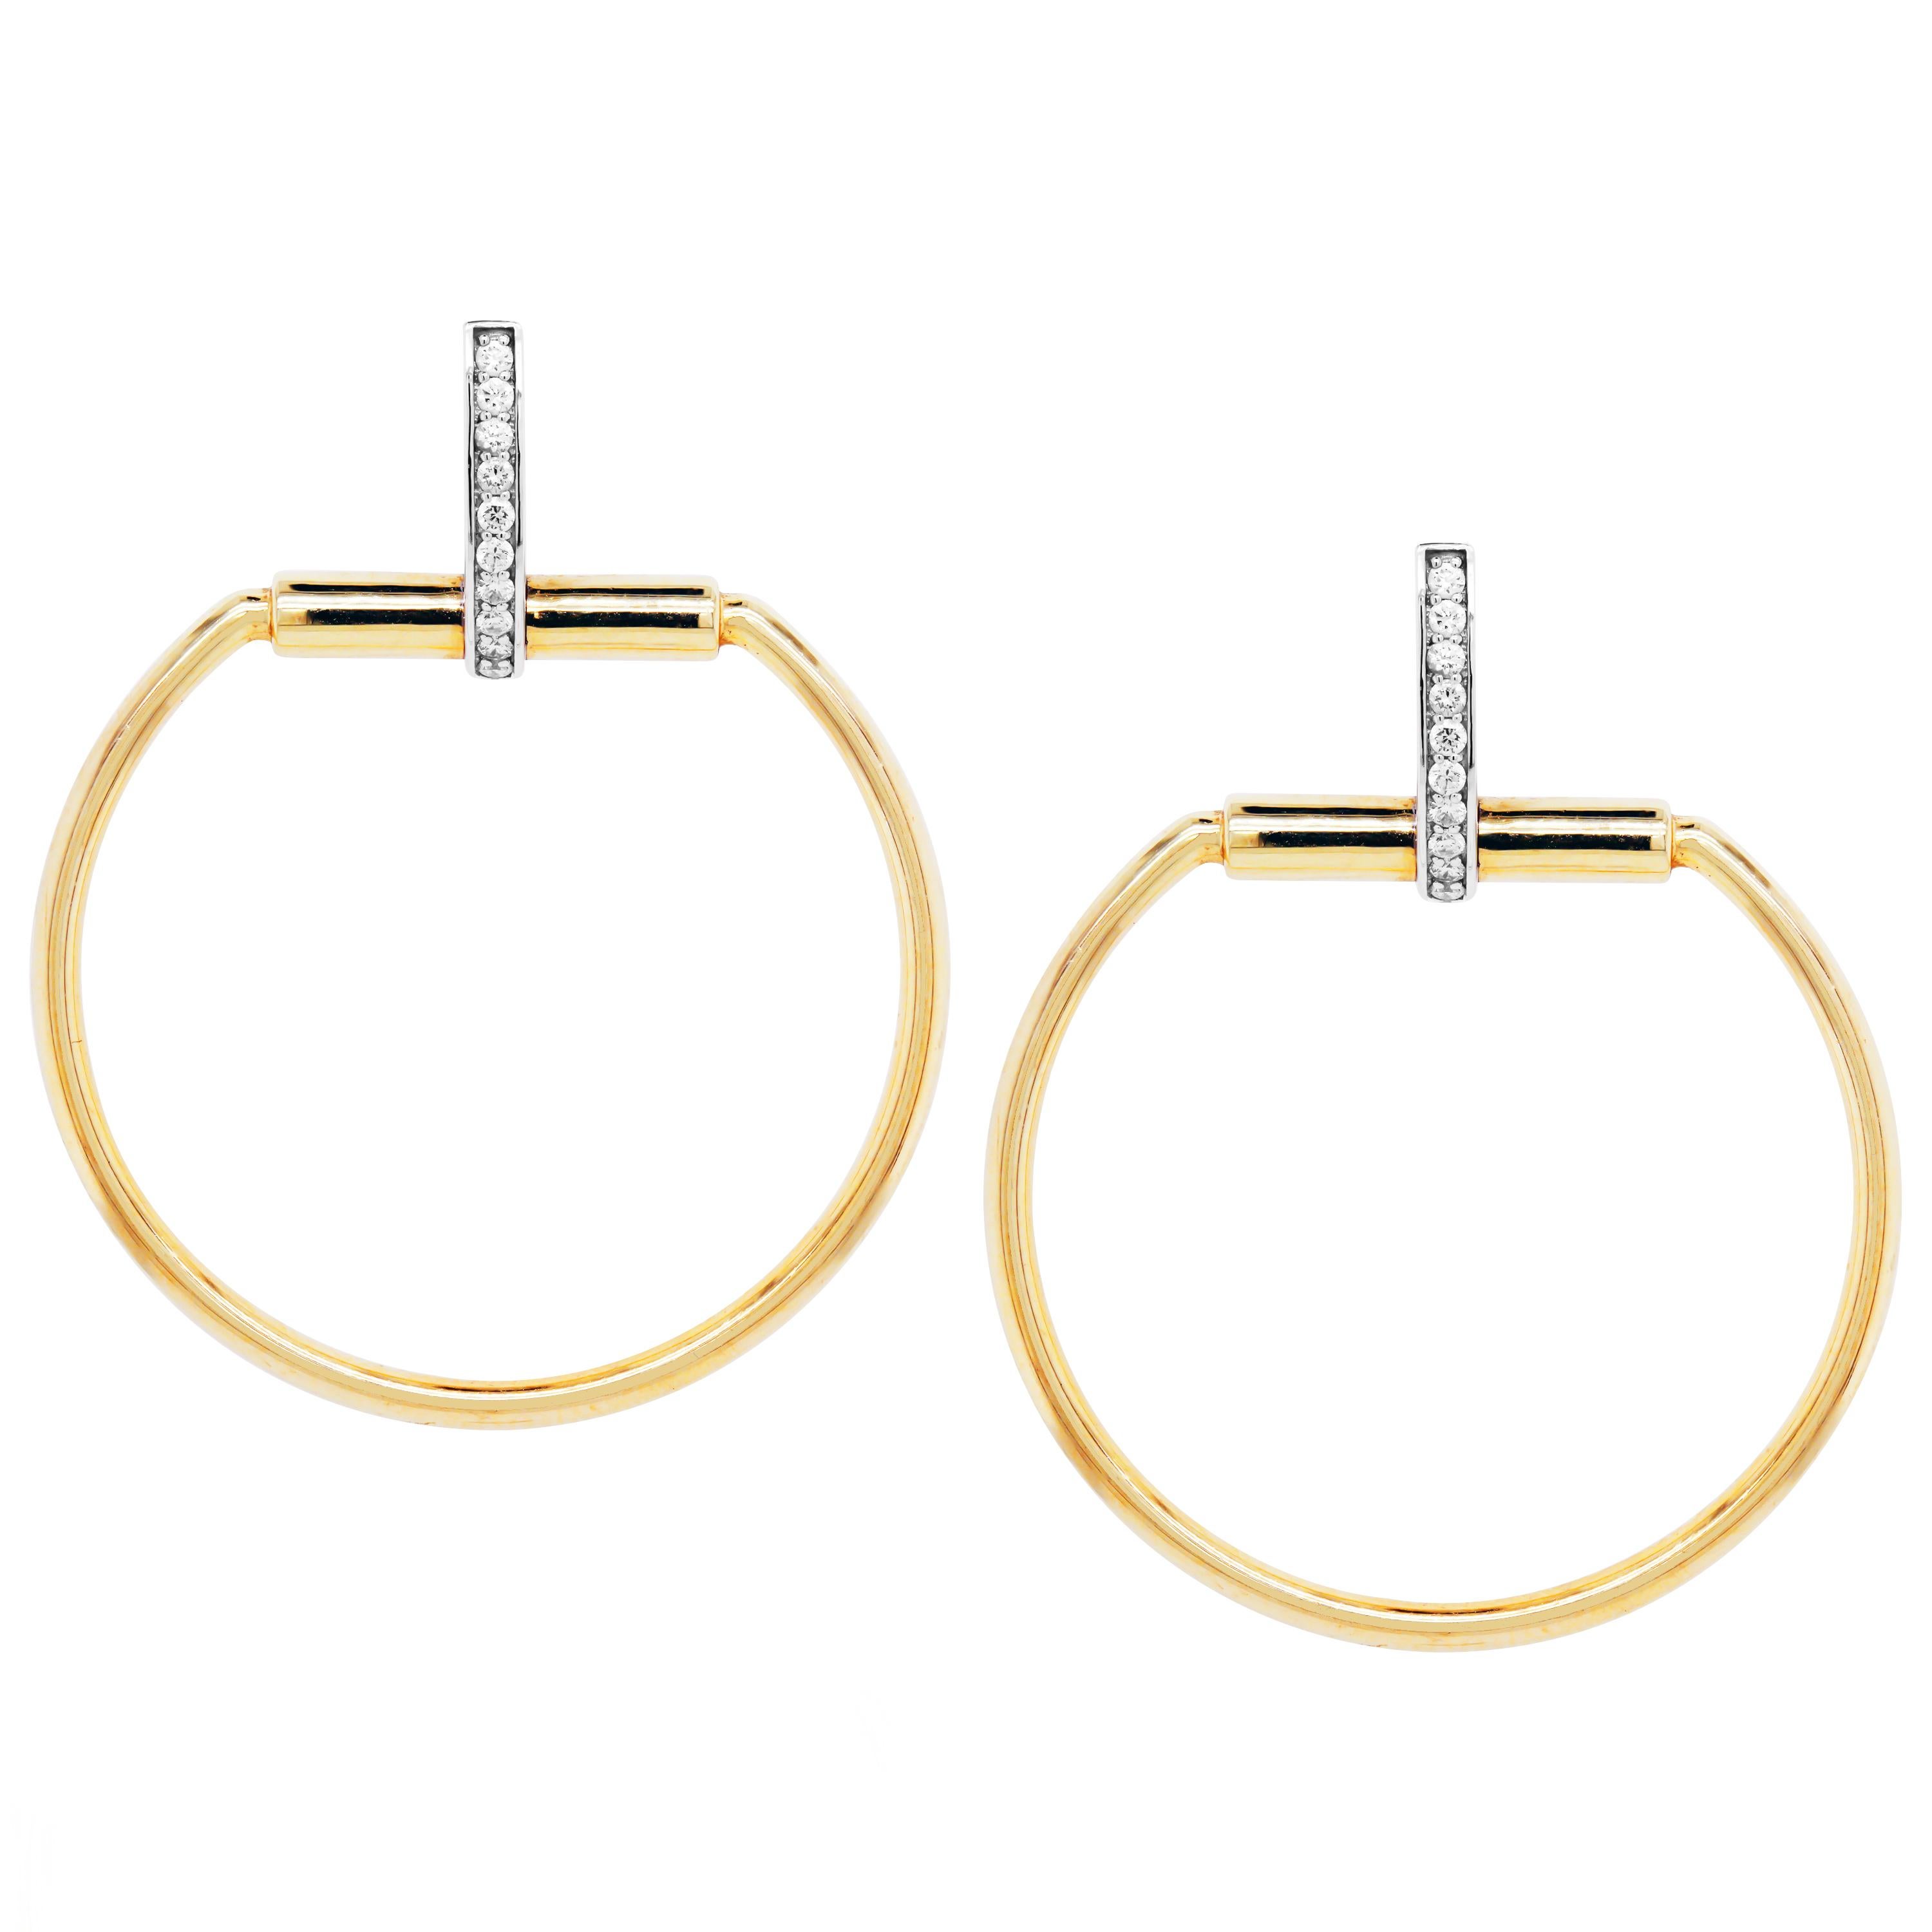 Round Cut Roberto Coin Classica Parisienne Yellow Gold Small Diamond Circle Drop Earrings 